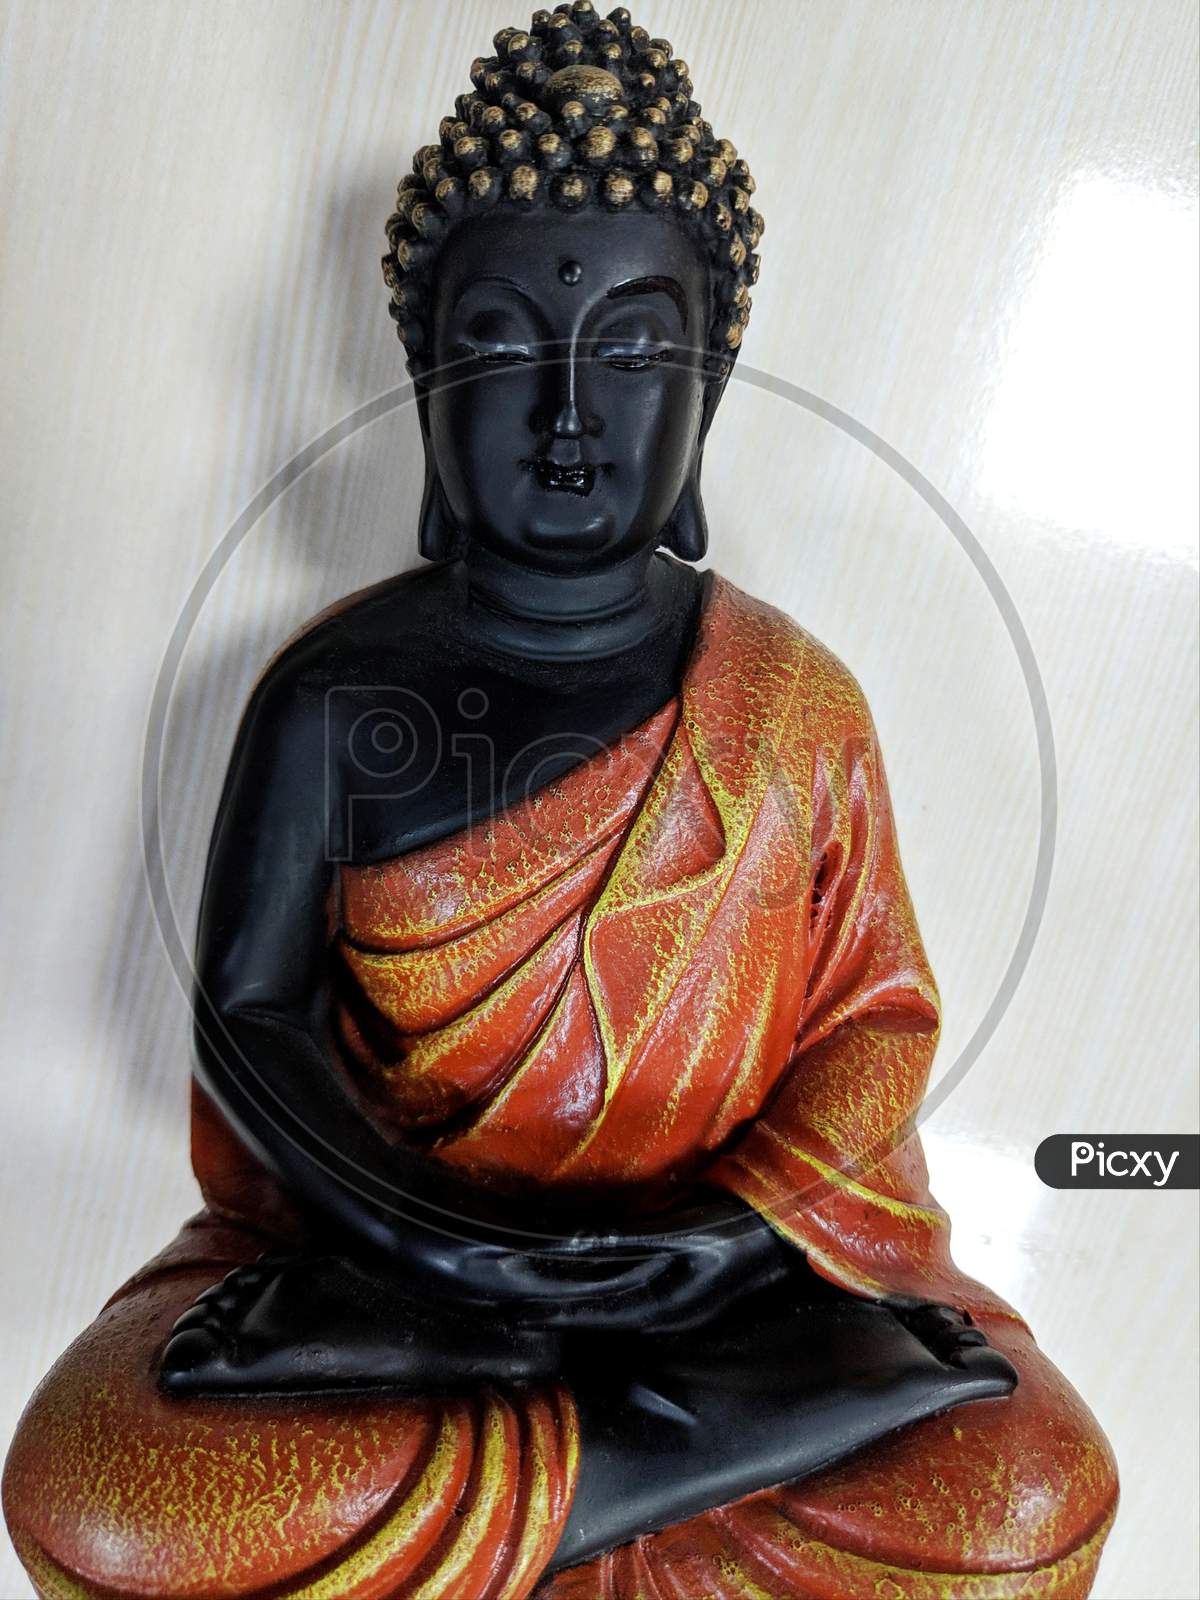 Buddha In A Meditation Pose, Under Protection Of The King Of Nag - Mukalinda. Figure Isolated On A Black Background.